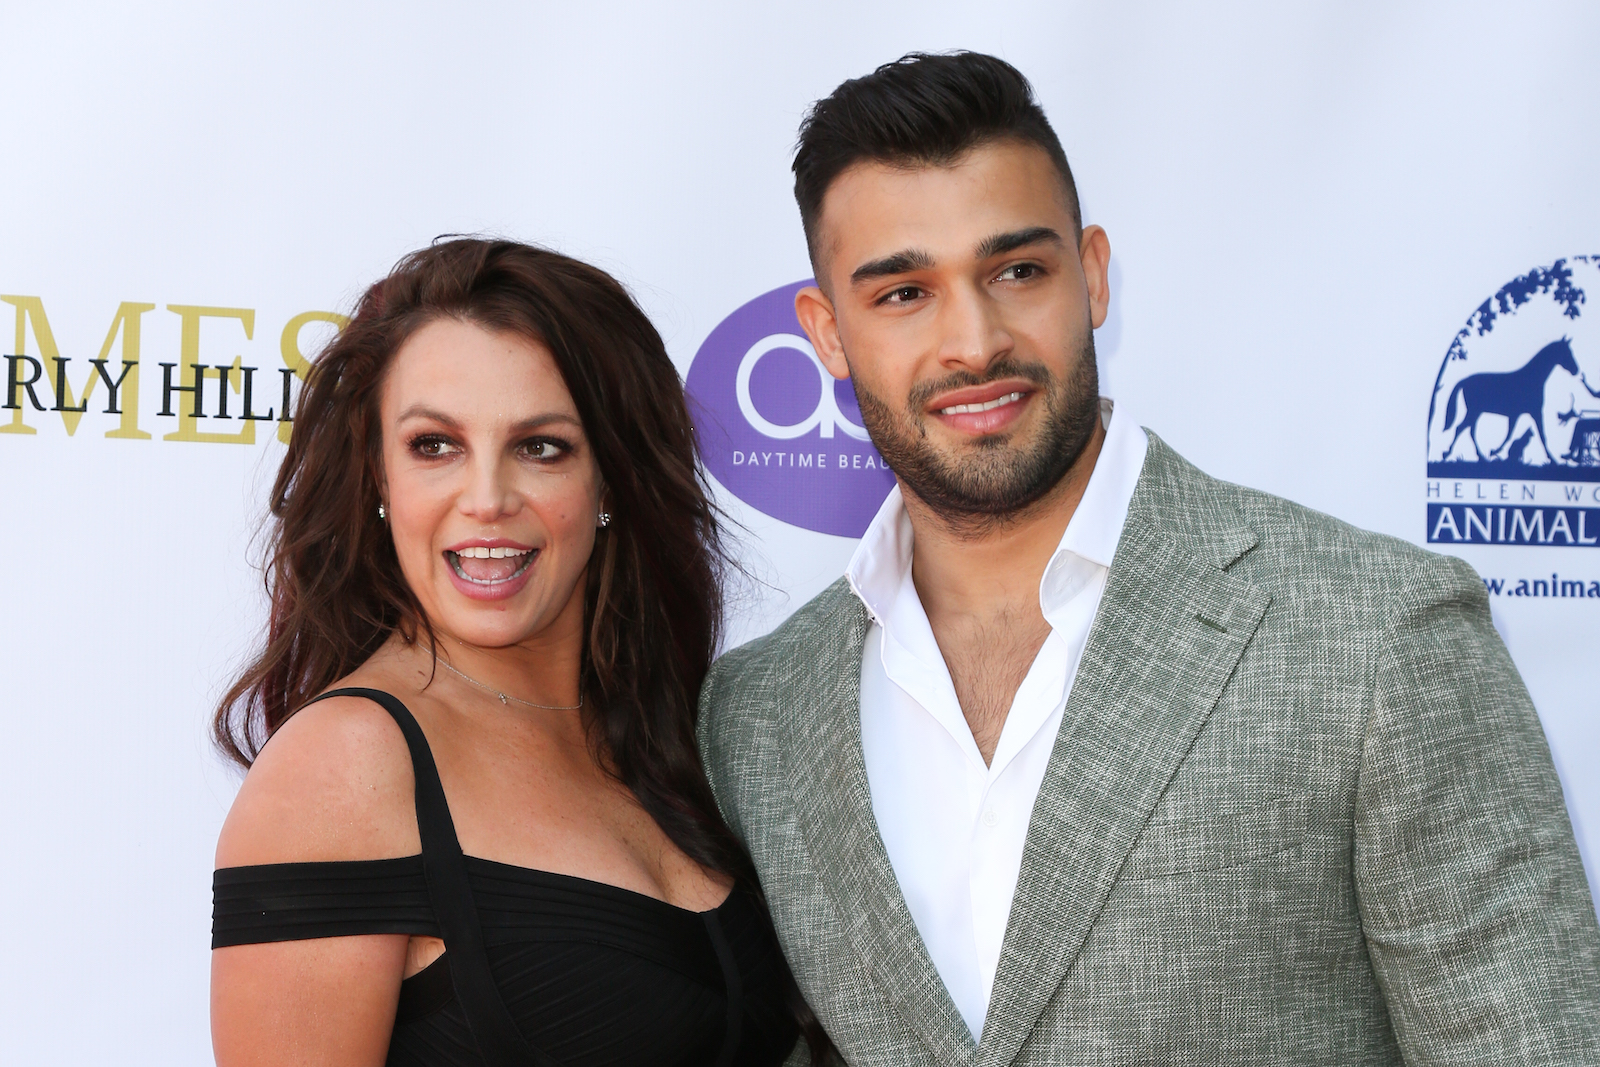 Britney Spears and Sam Asghari smiling together at an event